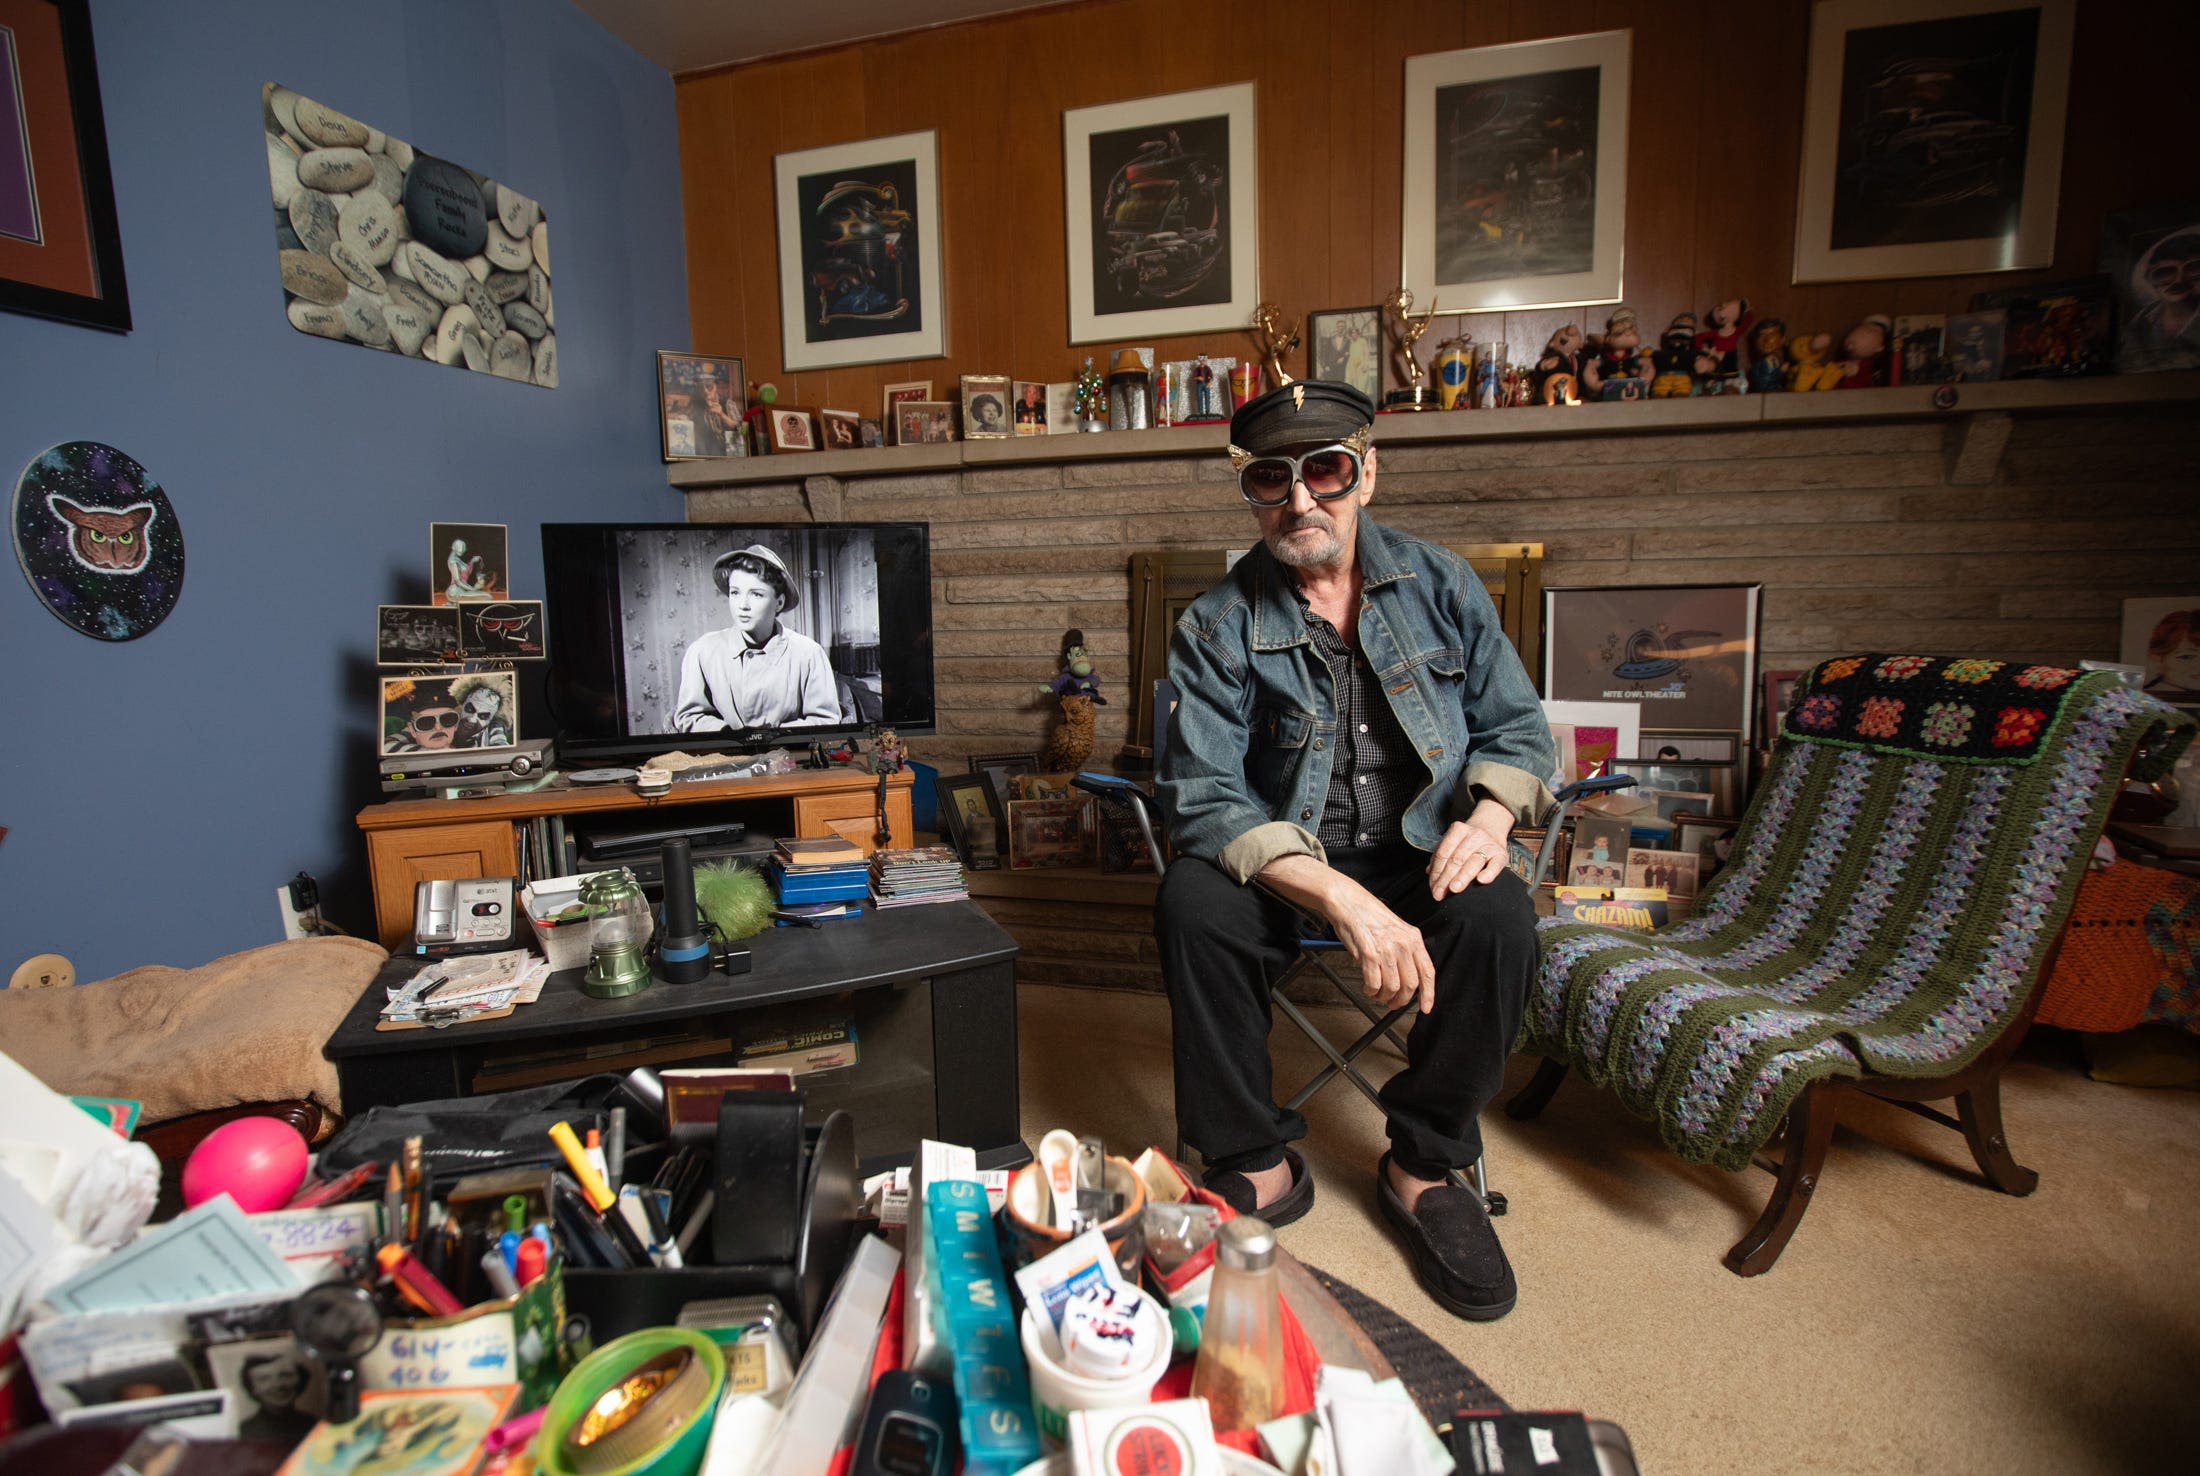 50 Years of Fritz the Nite Owl: How a Columbus DJ became a beloved pop-culture fixture